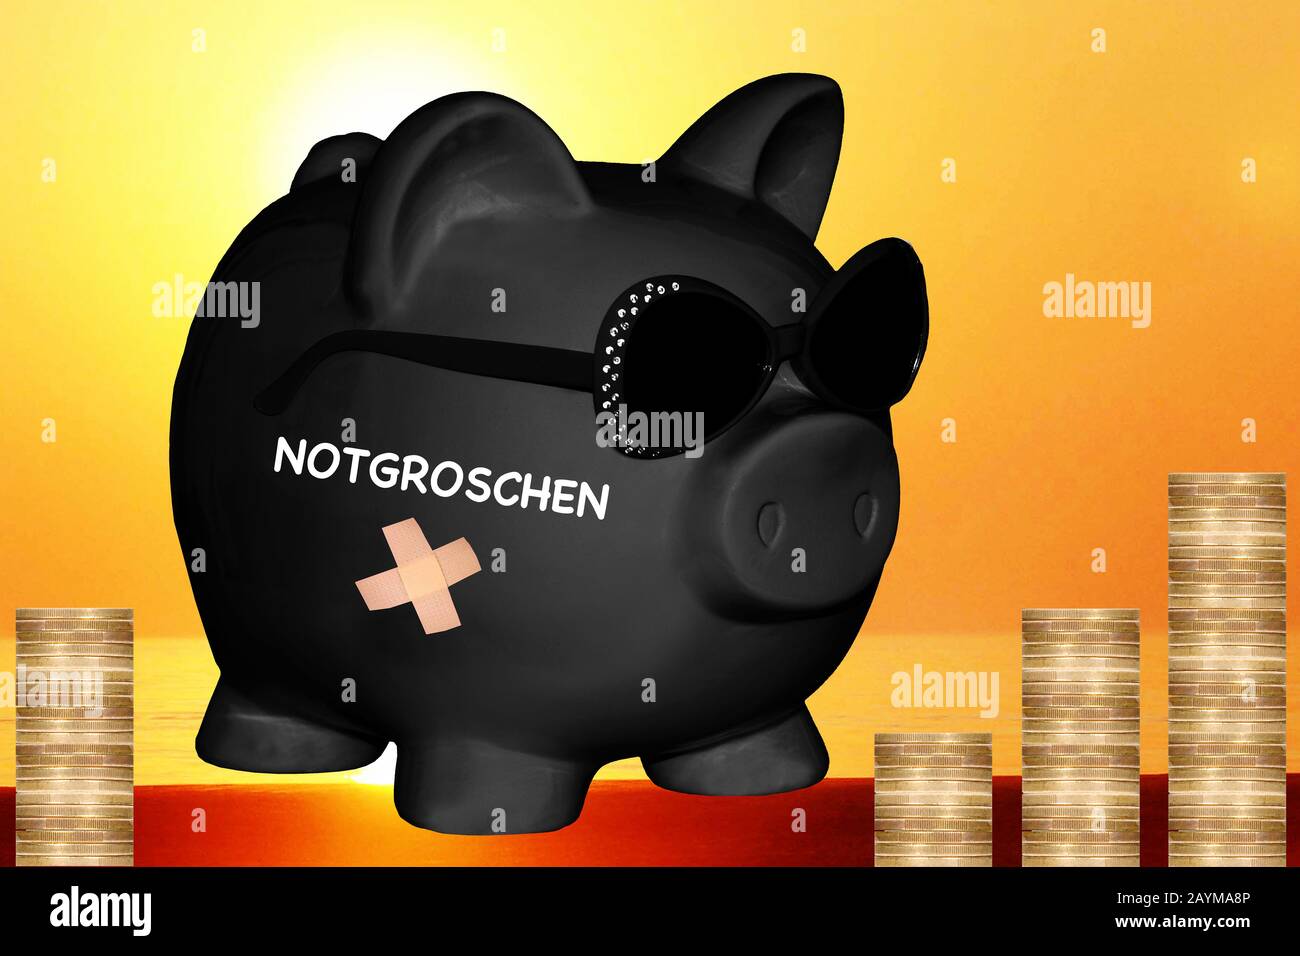 black piggy bank with sun glasses with lettering Notgroschen, nest egg, coin stacks in background, composing Stock Photo